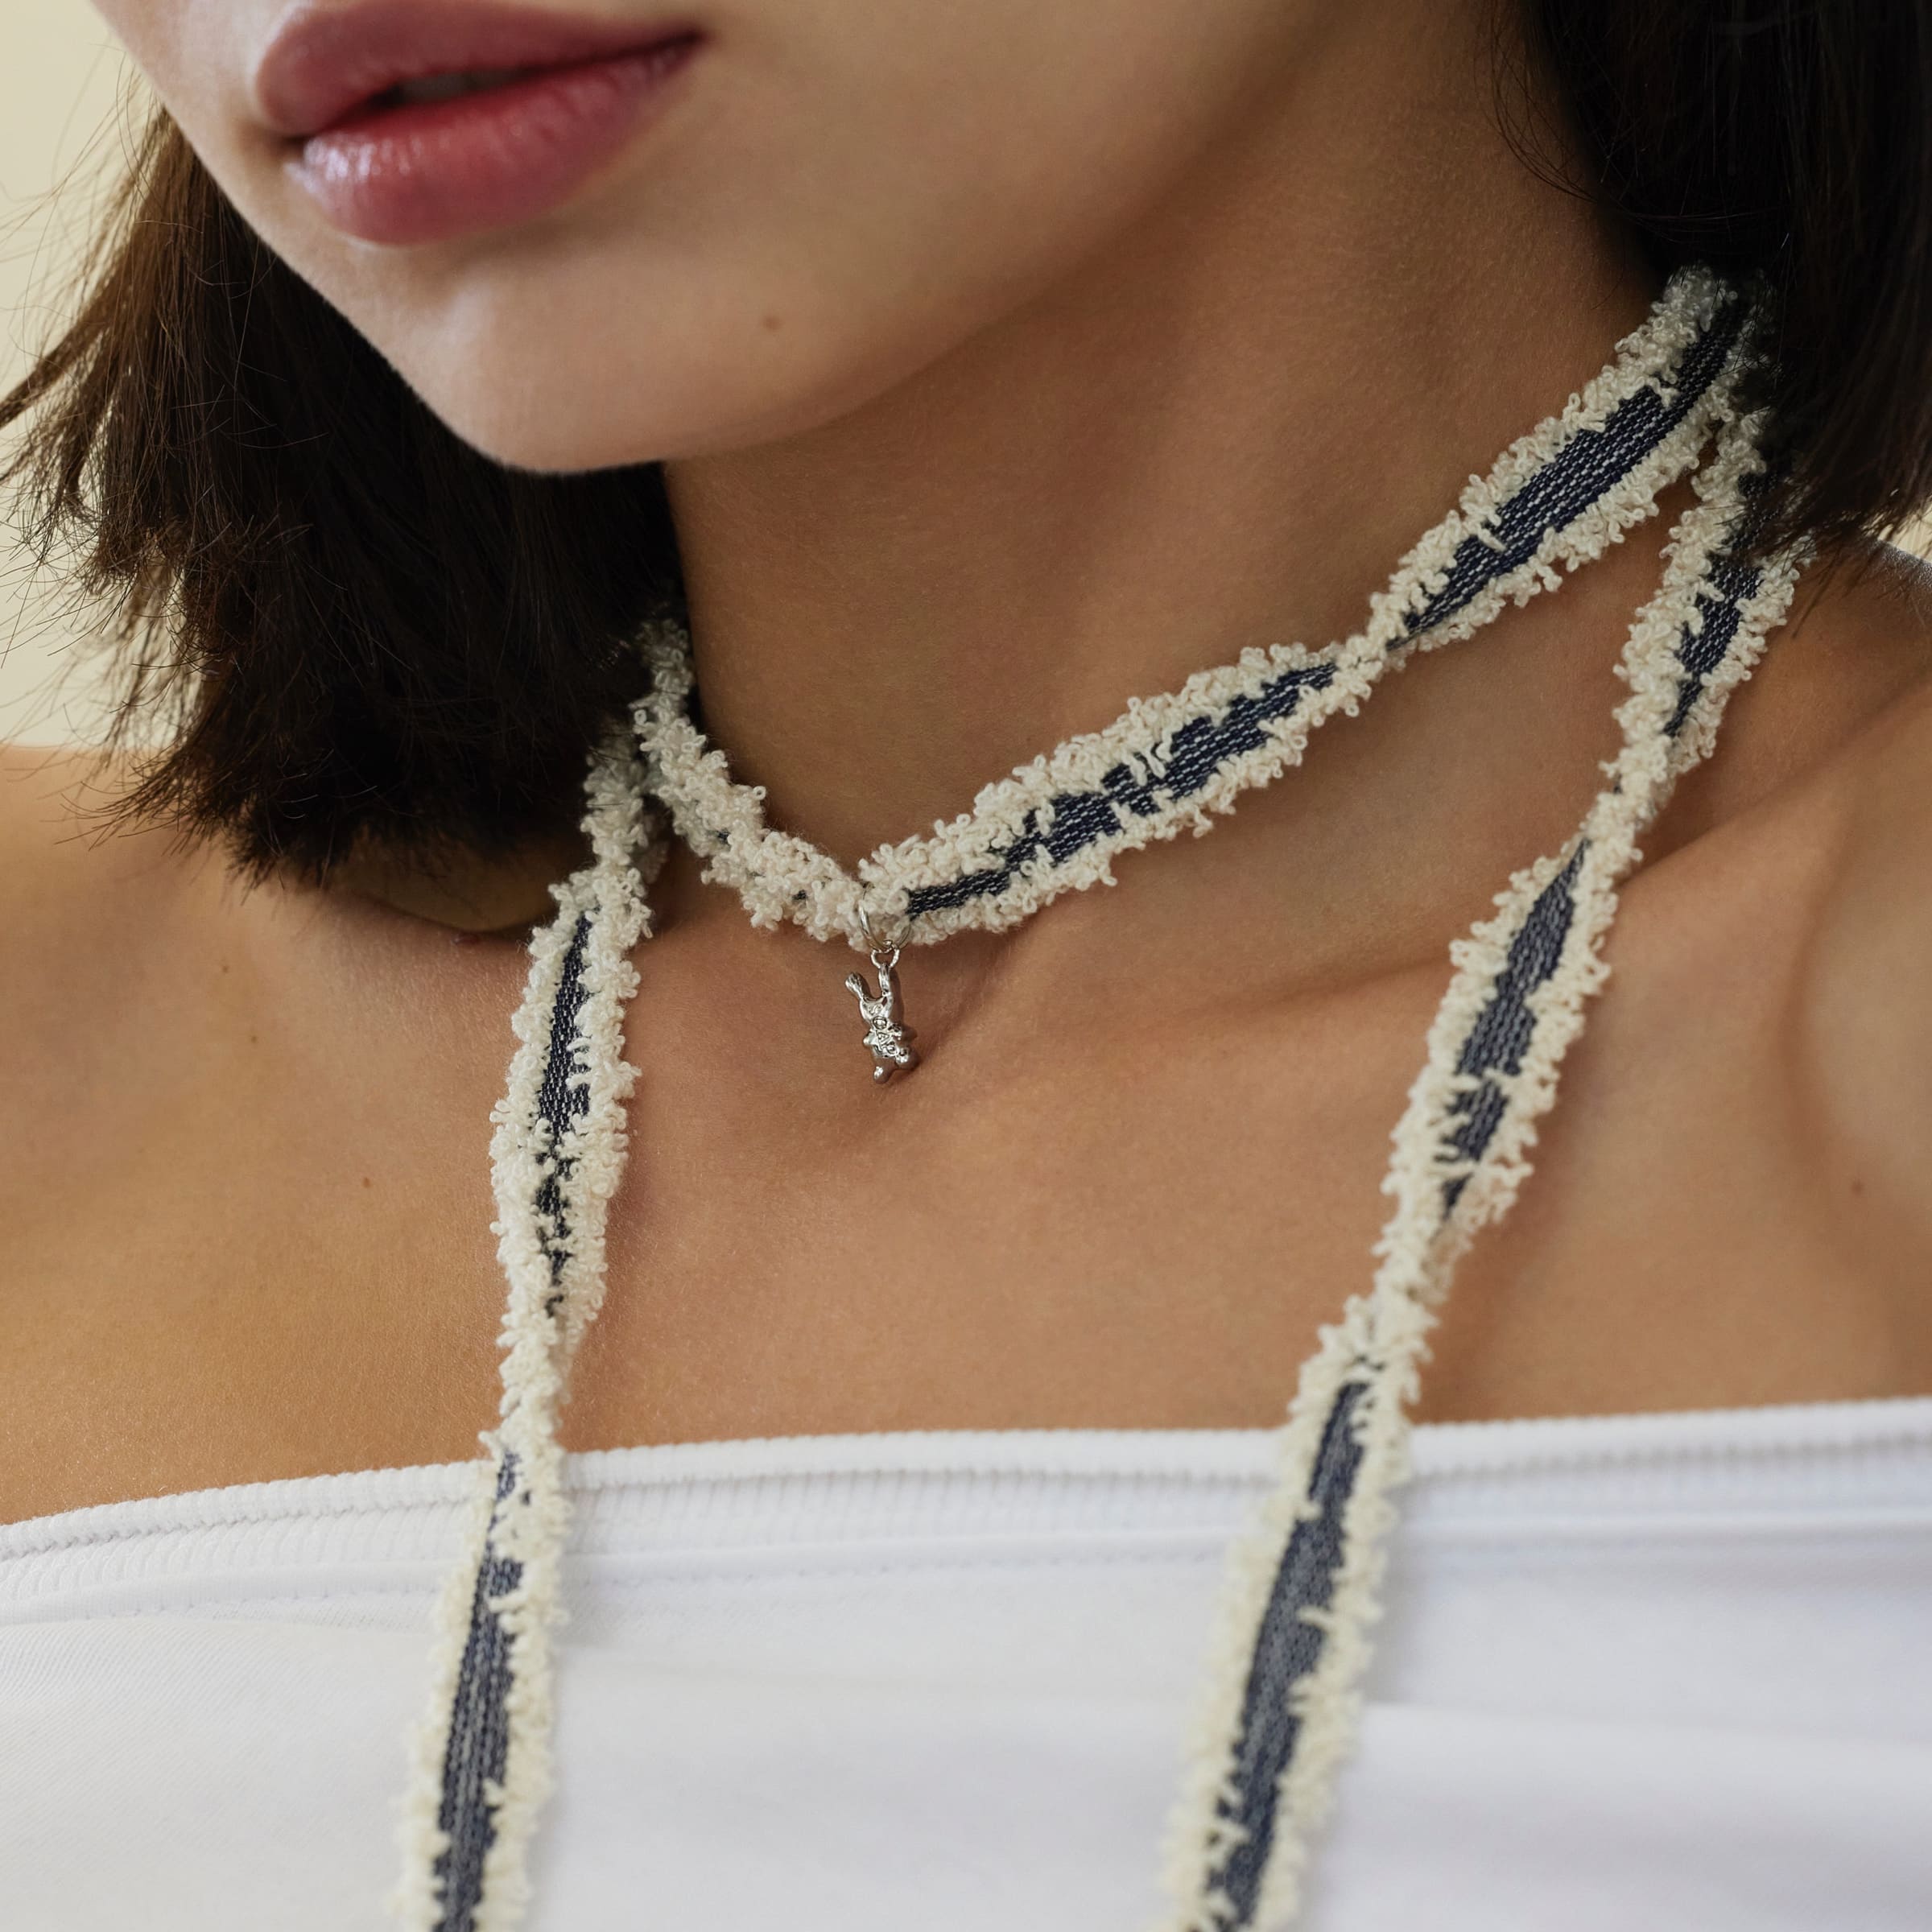 SOAPY バニー デニム チョーカー ネックレス / SOAPY BUNNY DENIM CHOKER NECKLACE